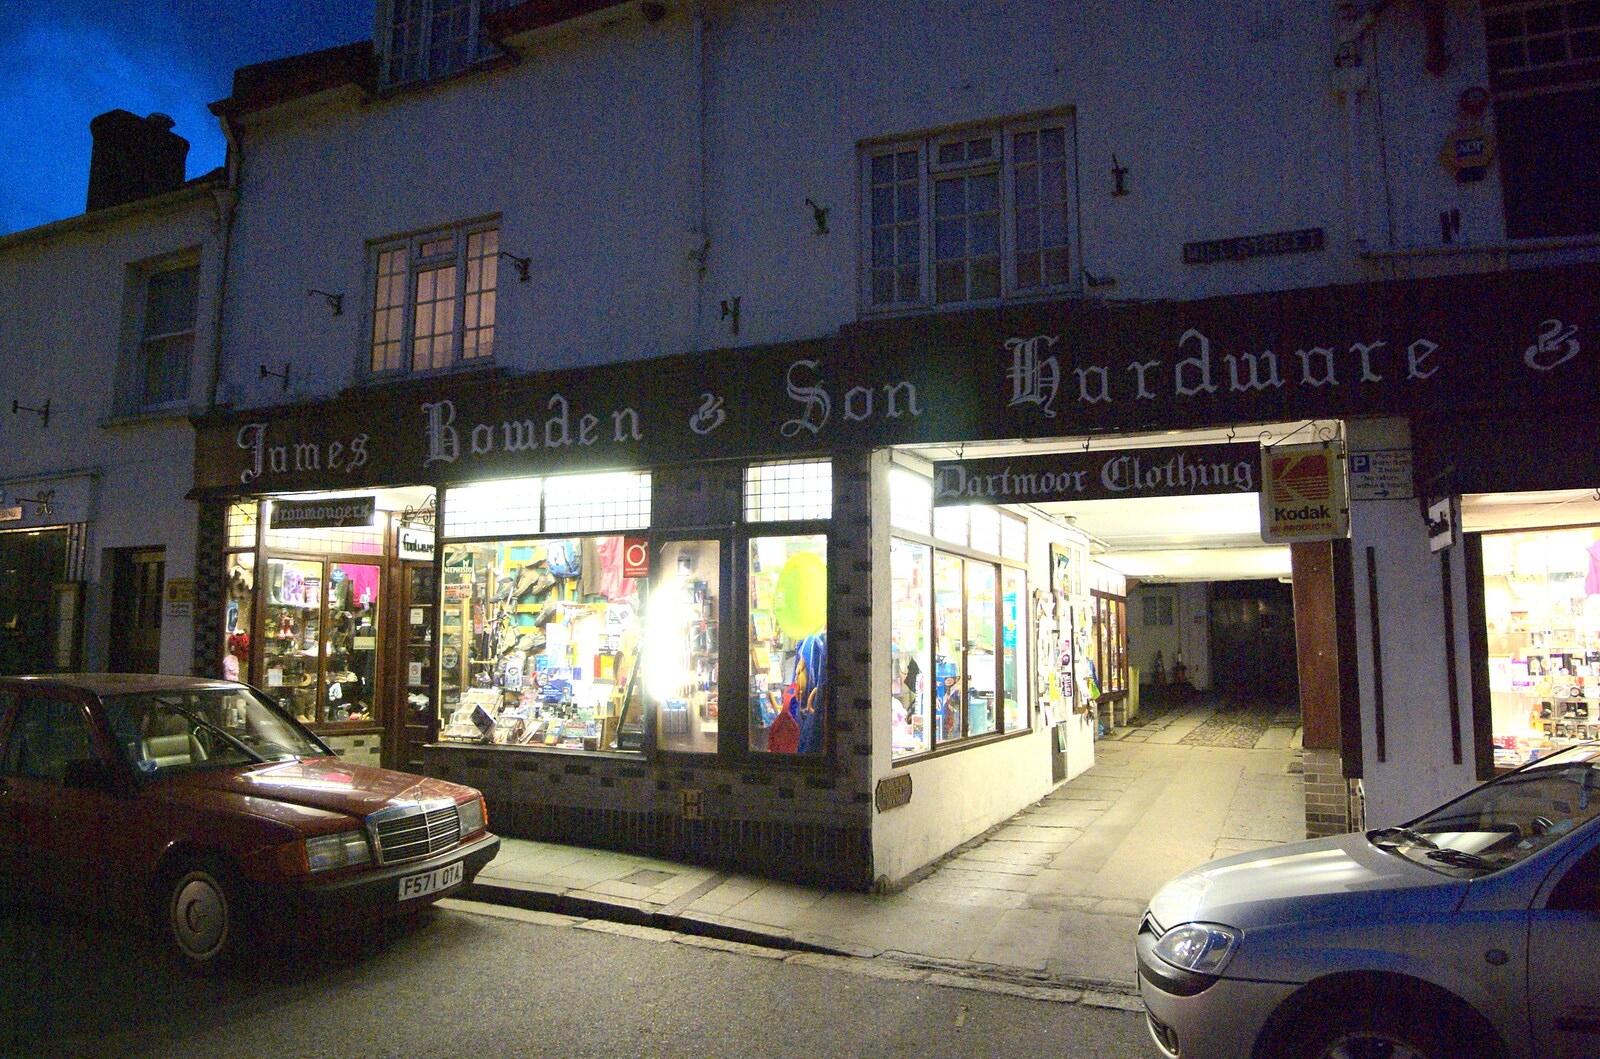 James Bowden Hardware in Chagford from Easter in Chagford and Hoo Meavy, Devon - 3rd April 2010